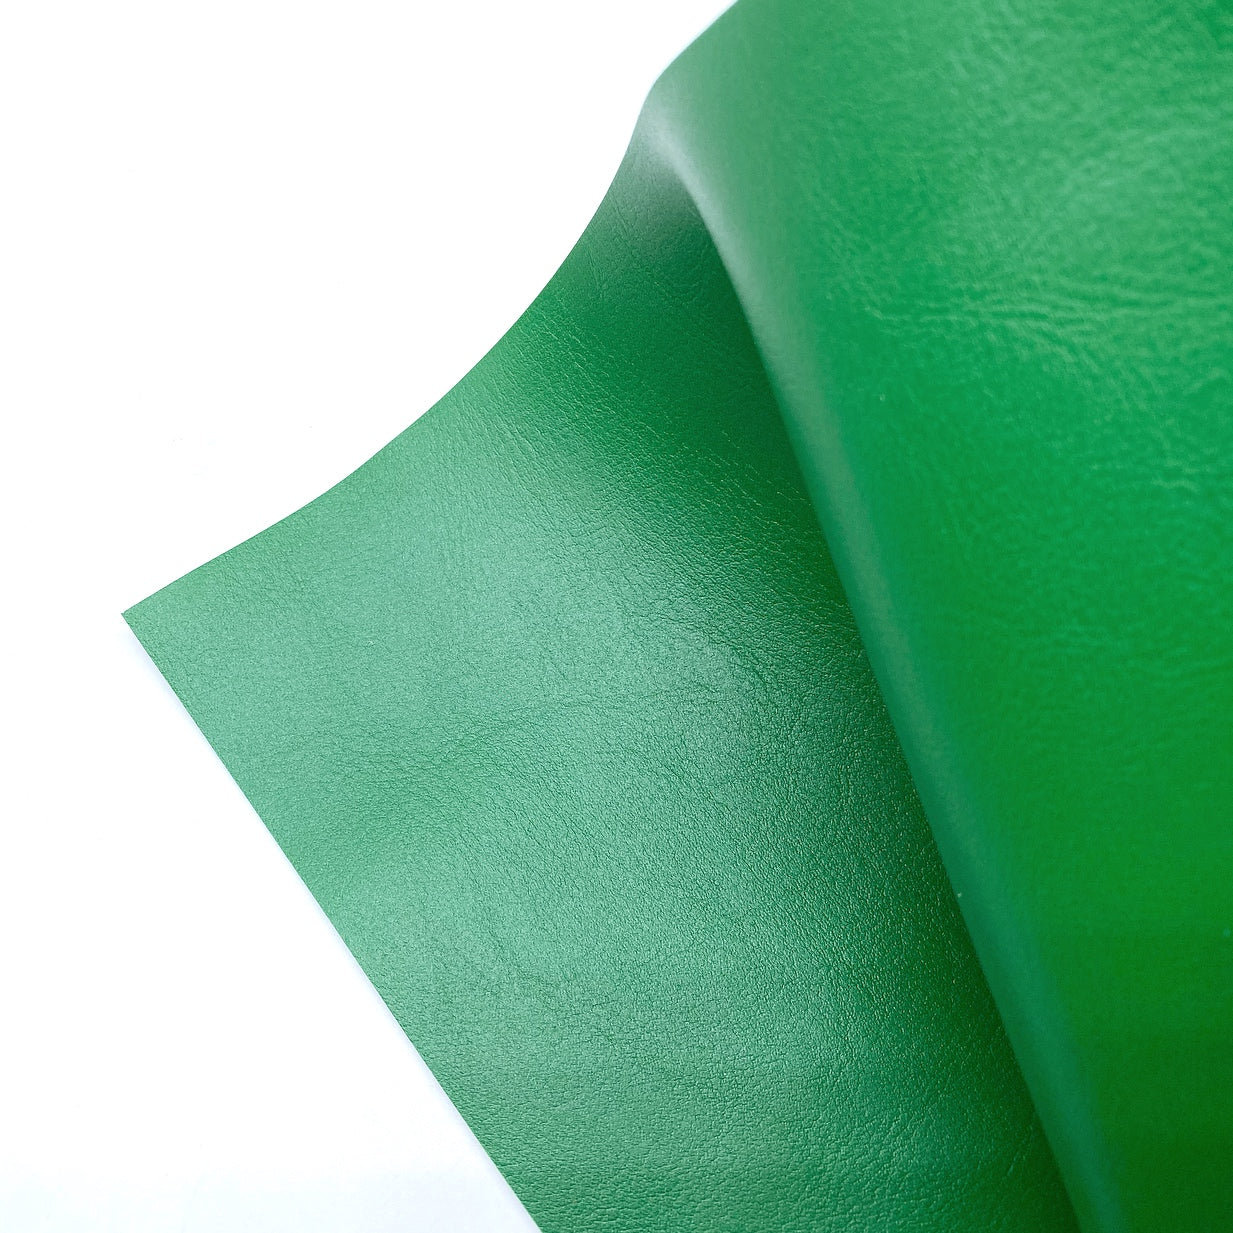 Evergreen Core Premium Faux Leather Fabric Sheets